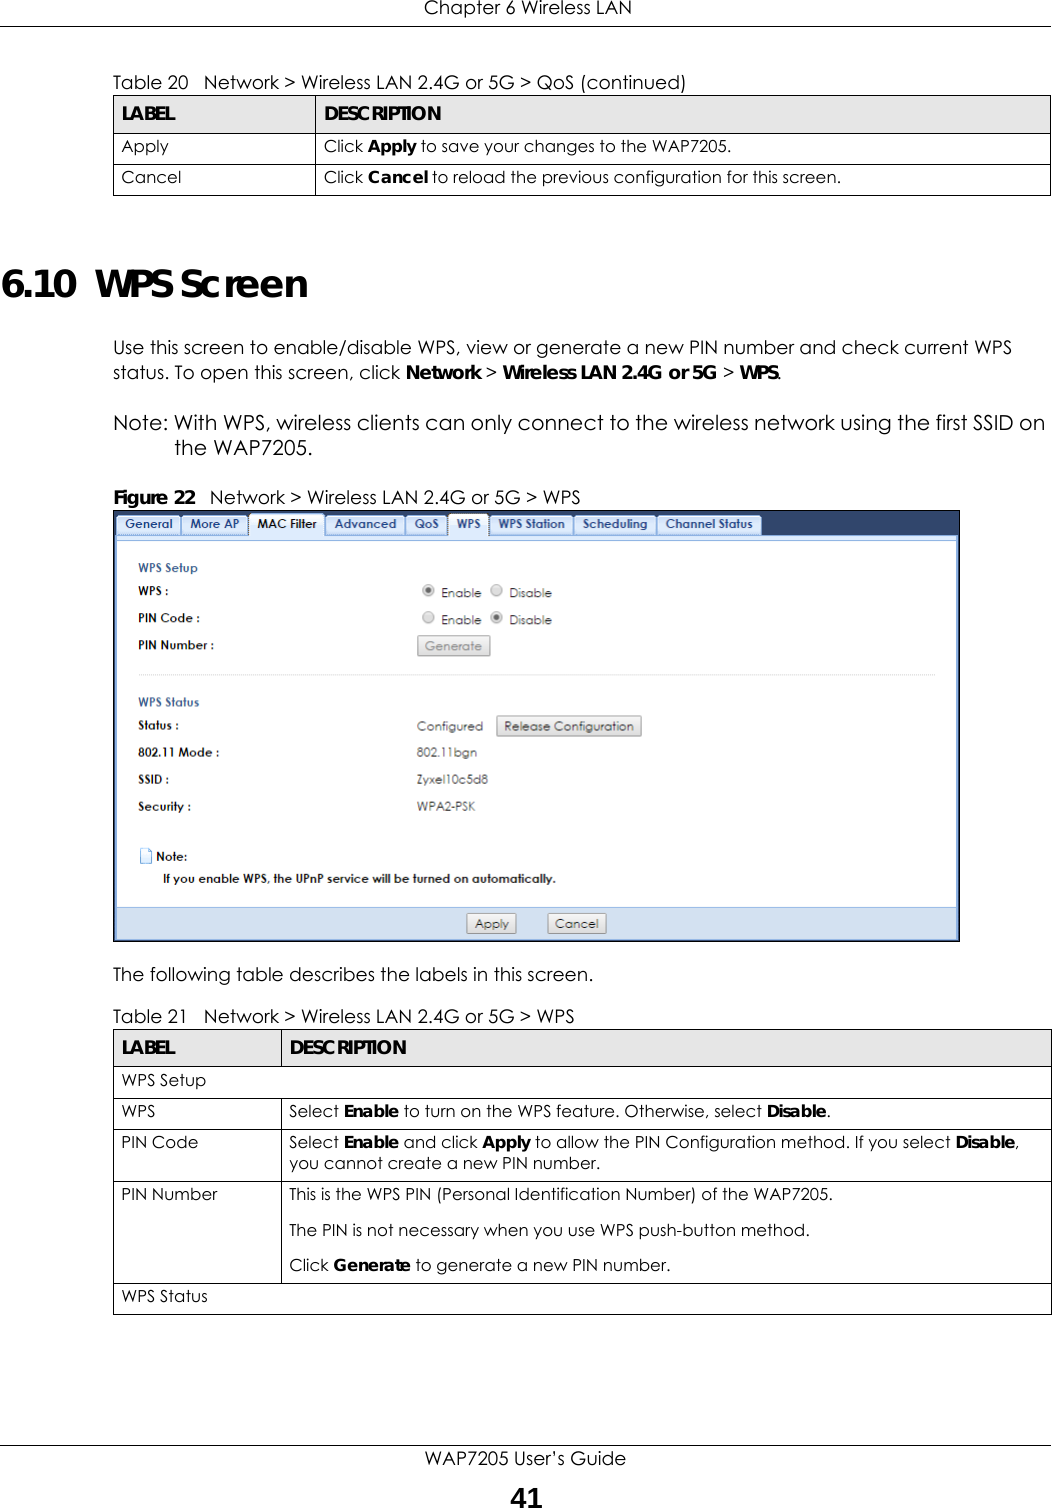  Chapter 6 Wireless LANWAP7205 User’s Guide416.10  WPS ScreenUse this screen to enable/disable WPS, view or generate a new PIN number and check current WPS status. To open this screen, click Network &gt; Wireless LAN 2.4G or 5G &gt; WPS.Note: With WPS, wireless clients can only connect to the wireless network using the first SSID on the WAP7205.Figure 22   Network &gt; Wireless LAN 2.4G or 5G &gt; WPSThe following table describes the labels in this screen.Apply Click Apply to save your changes to the WAP7205.Cancel Click Cancel to reload the previous configuration for this screen.Table 20   Network &gt; Wireless LAN 2.4G or 5G &gt; QoS (continued)LABEL DESCRIPTIONTable 21   Network &gt; Wireless LAN 2.4G or 5G &gt; WPSLABEL DESCRIPTIONWPS SetupWPS Select Enable to turn on the WPS feature. Otherwise, select Disable.PIN Code Select Enable and click Apply to allow the PIN Configuration method. If you select Disable, you cannot create a new PIN number.PIN Number This is the WPS PIN (Personal Identification Number) of the WAP7205.The PIN is not necessary when you use WPS push-button method.Click Generate to generate a new PIN number.WPS Status